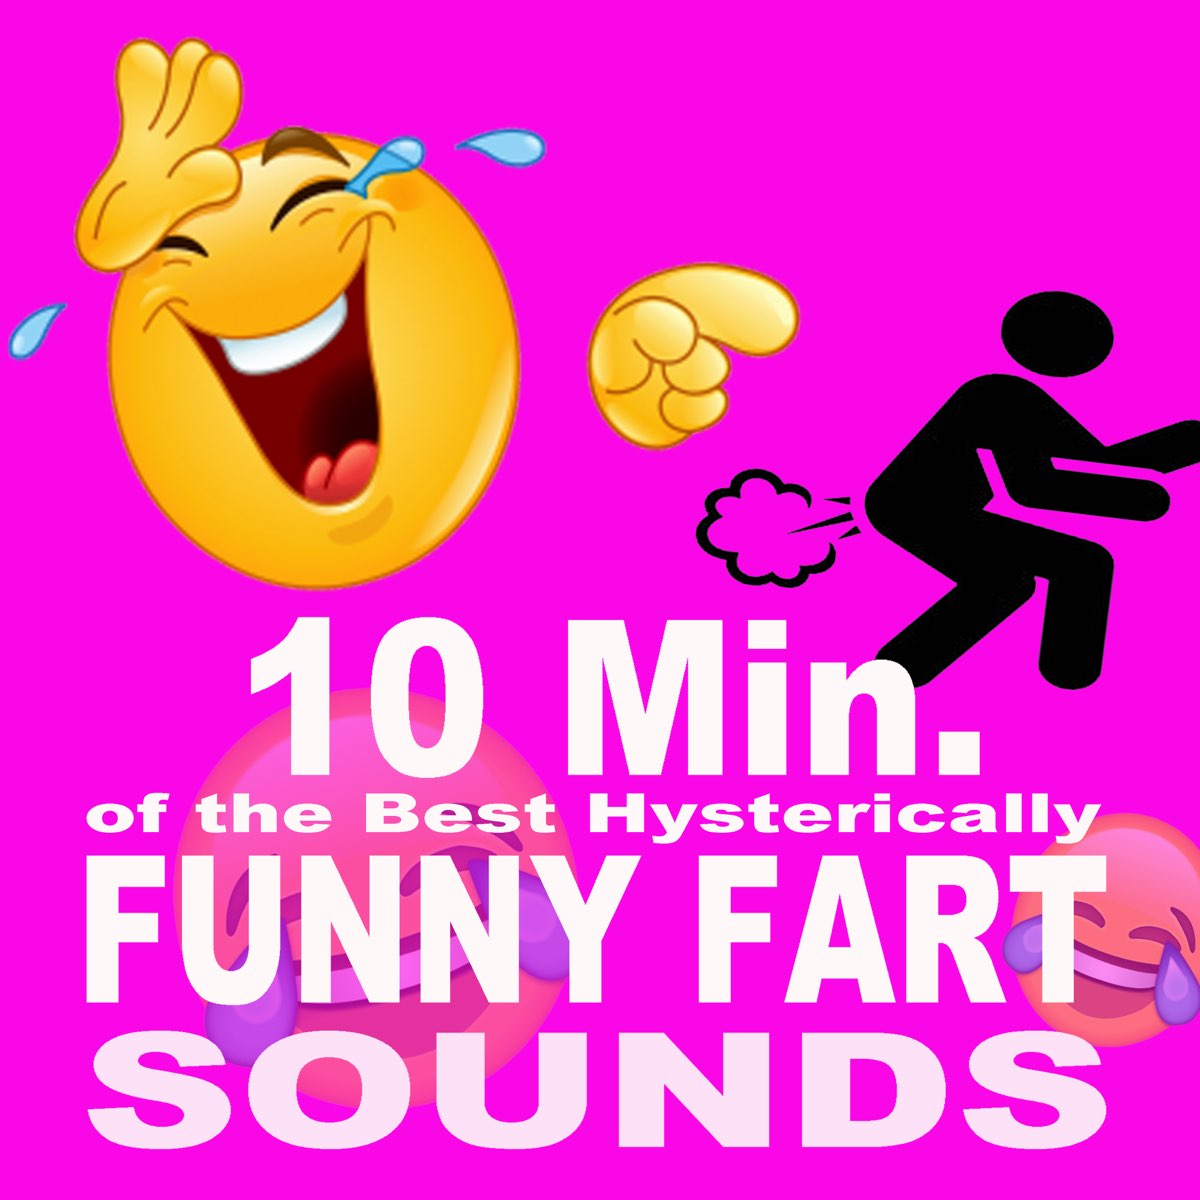 10 Minutes of the Best Hysterically Funny Fart Sounds Ever - Single - Album  by Fart Sounds - Apple Music